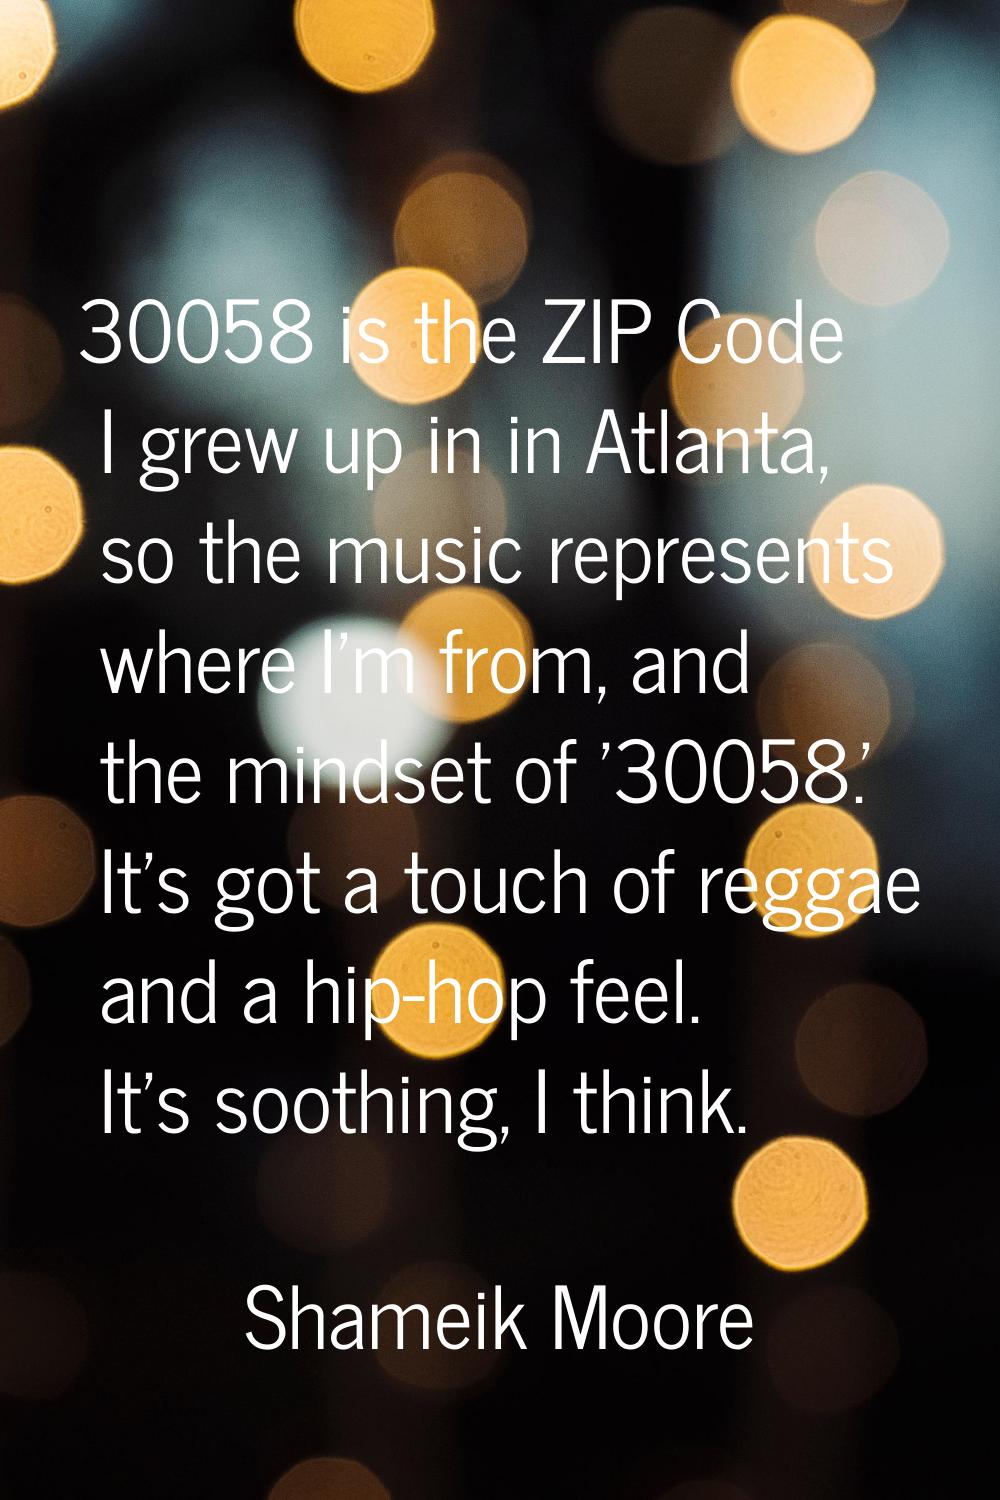 30058 is the ZIP Code I grew up in in Atlanta, so the music represents where I'm from, and the mind